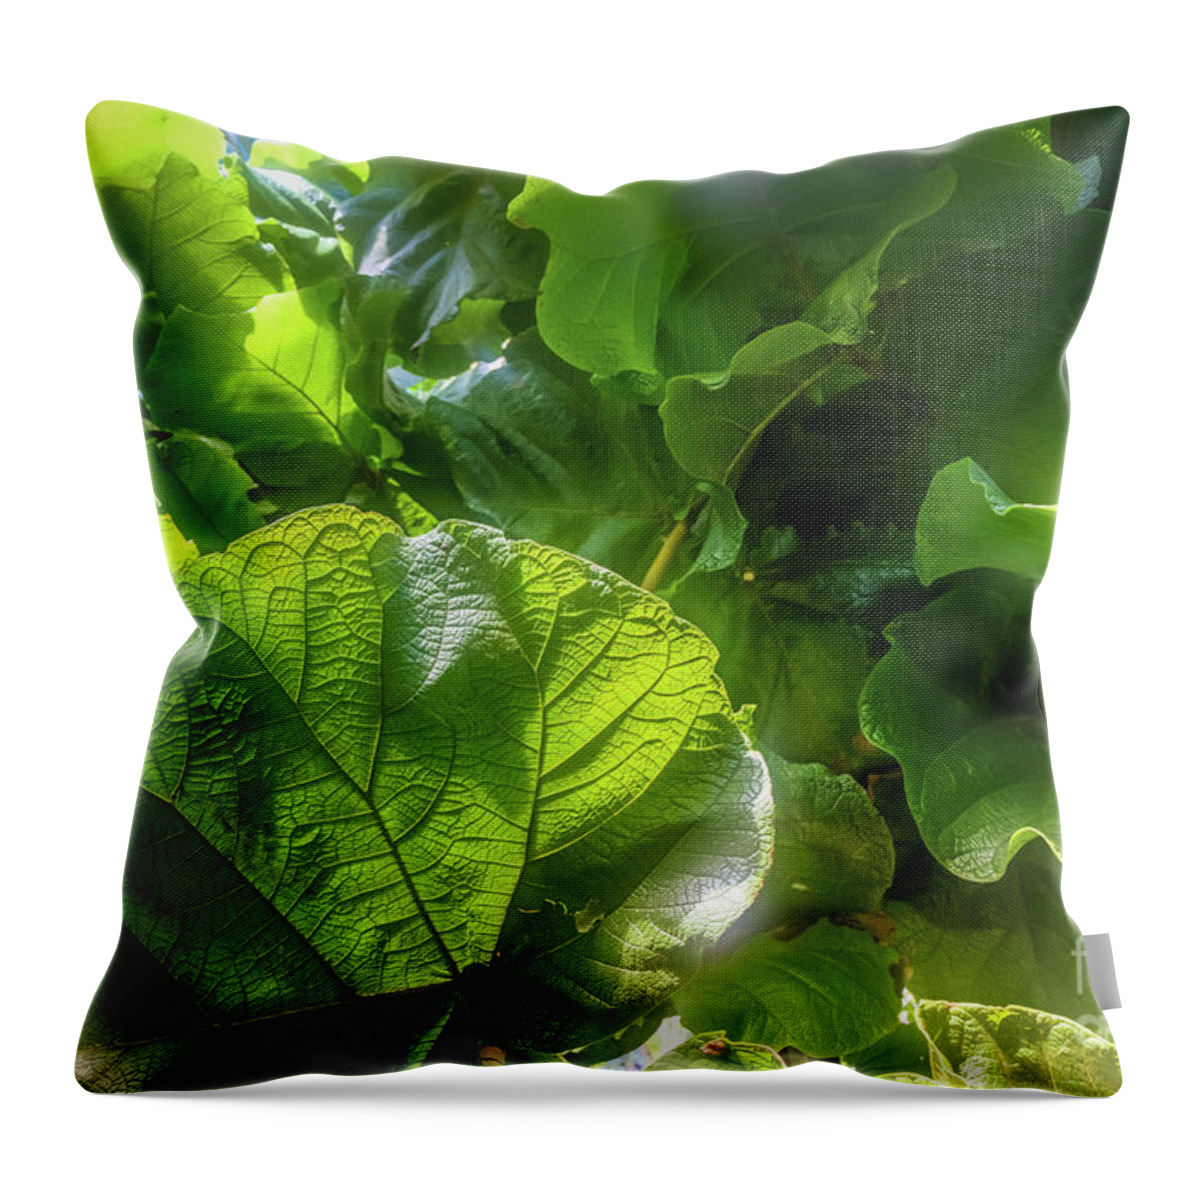 Tropical Forest By Marina Usmanskaya Throw Pillow featuring the photograph Tropical forest by Marina Usmanskaya